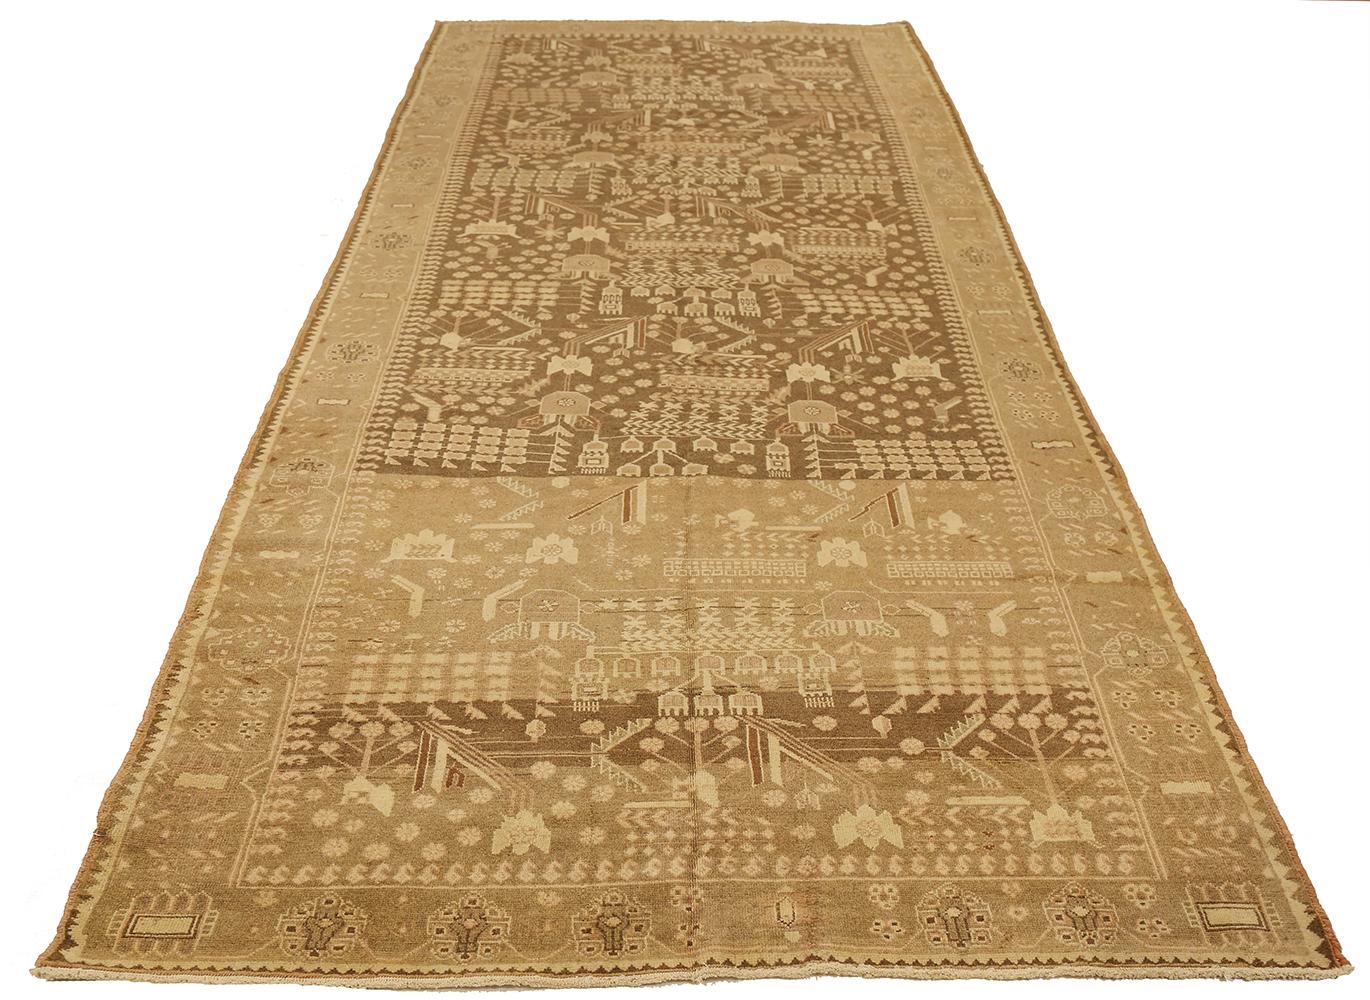 Antique Persian rug handwoven from the finest sheep’s wool and colored with all-natural vegetable dyes that are safe for humans and pets. It’s a traditional Saveh design highlighted by beige and ivory floral patterns. It’s a beautiful piece for